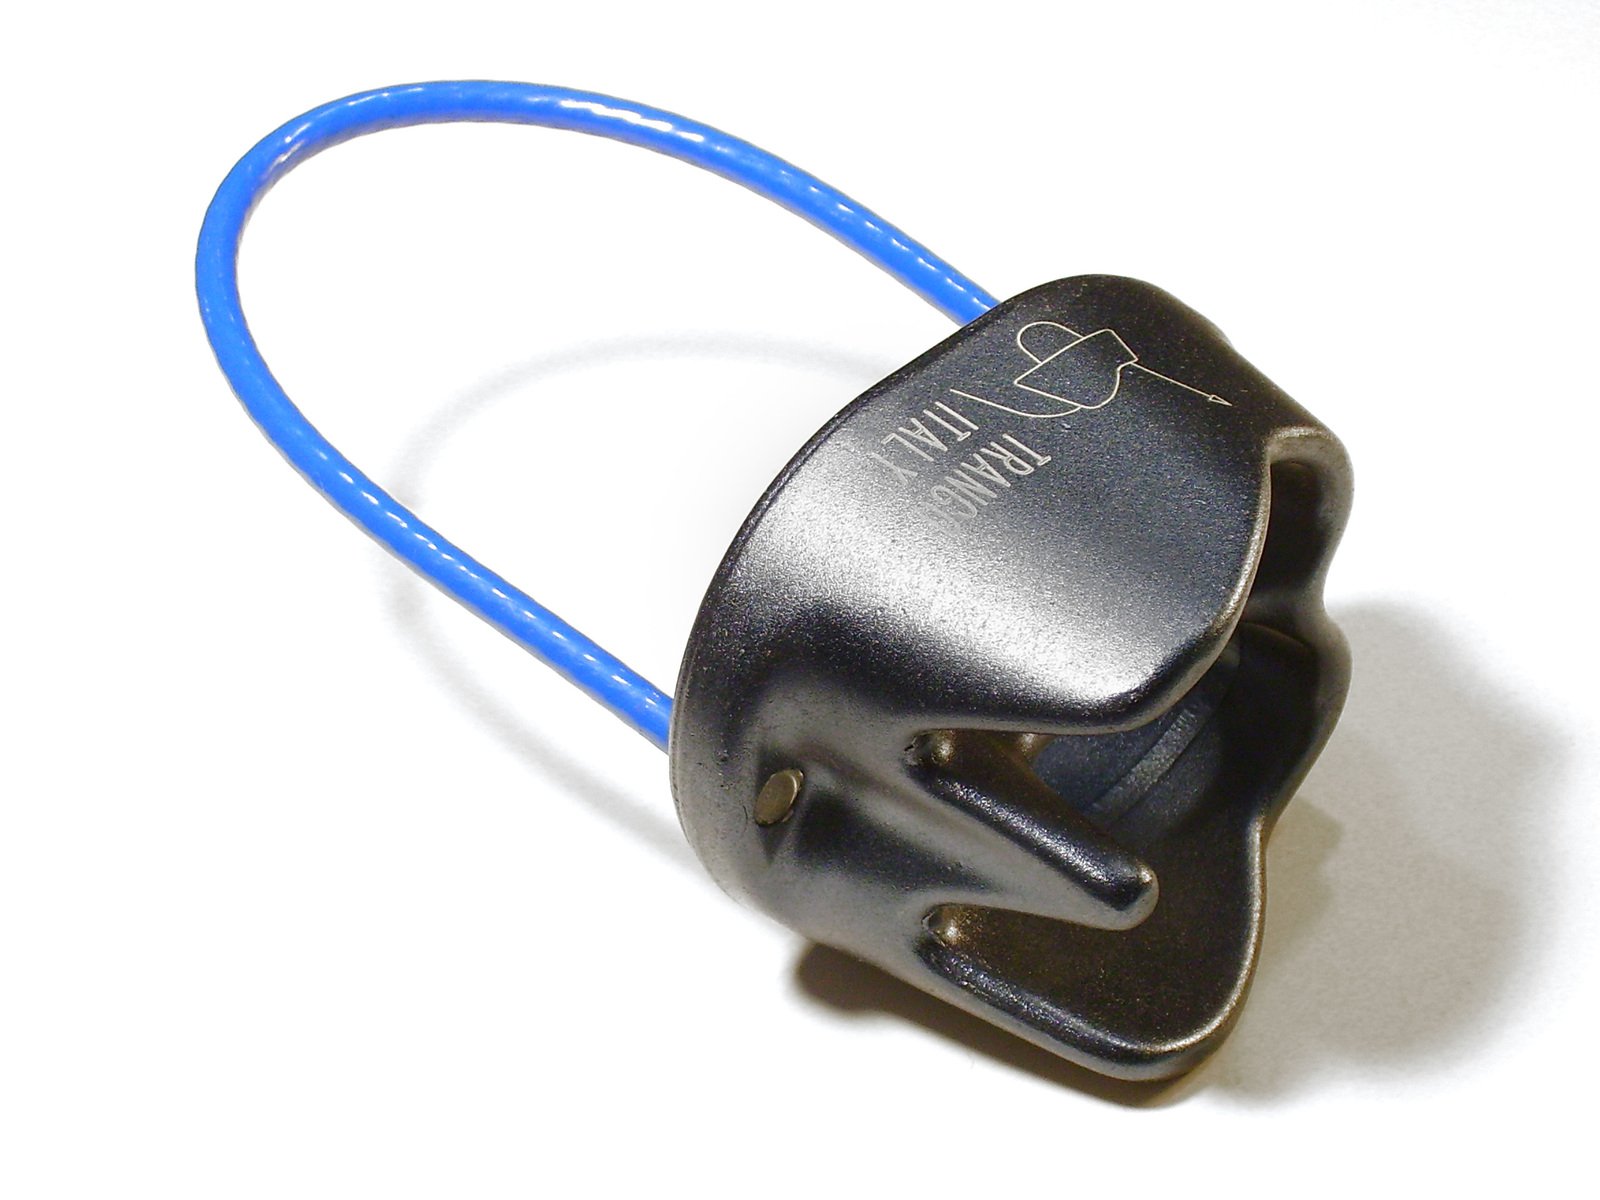 a blue rubber padlock for a watch